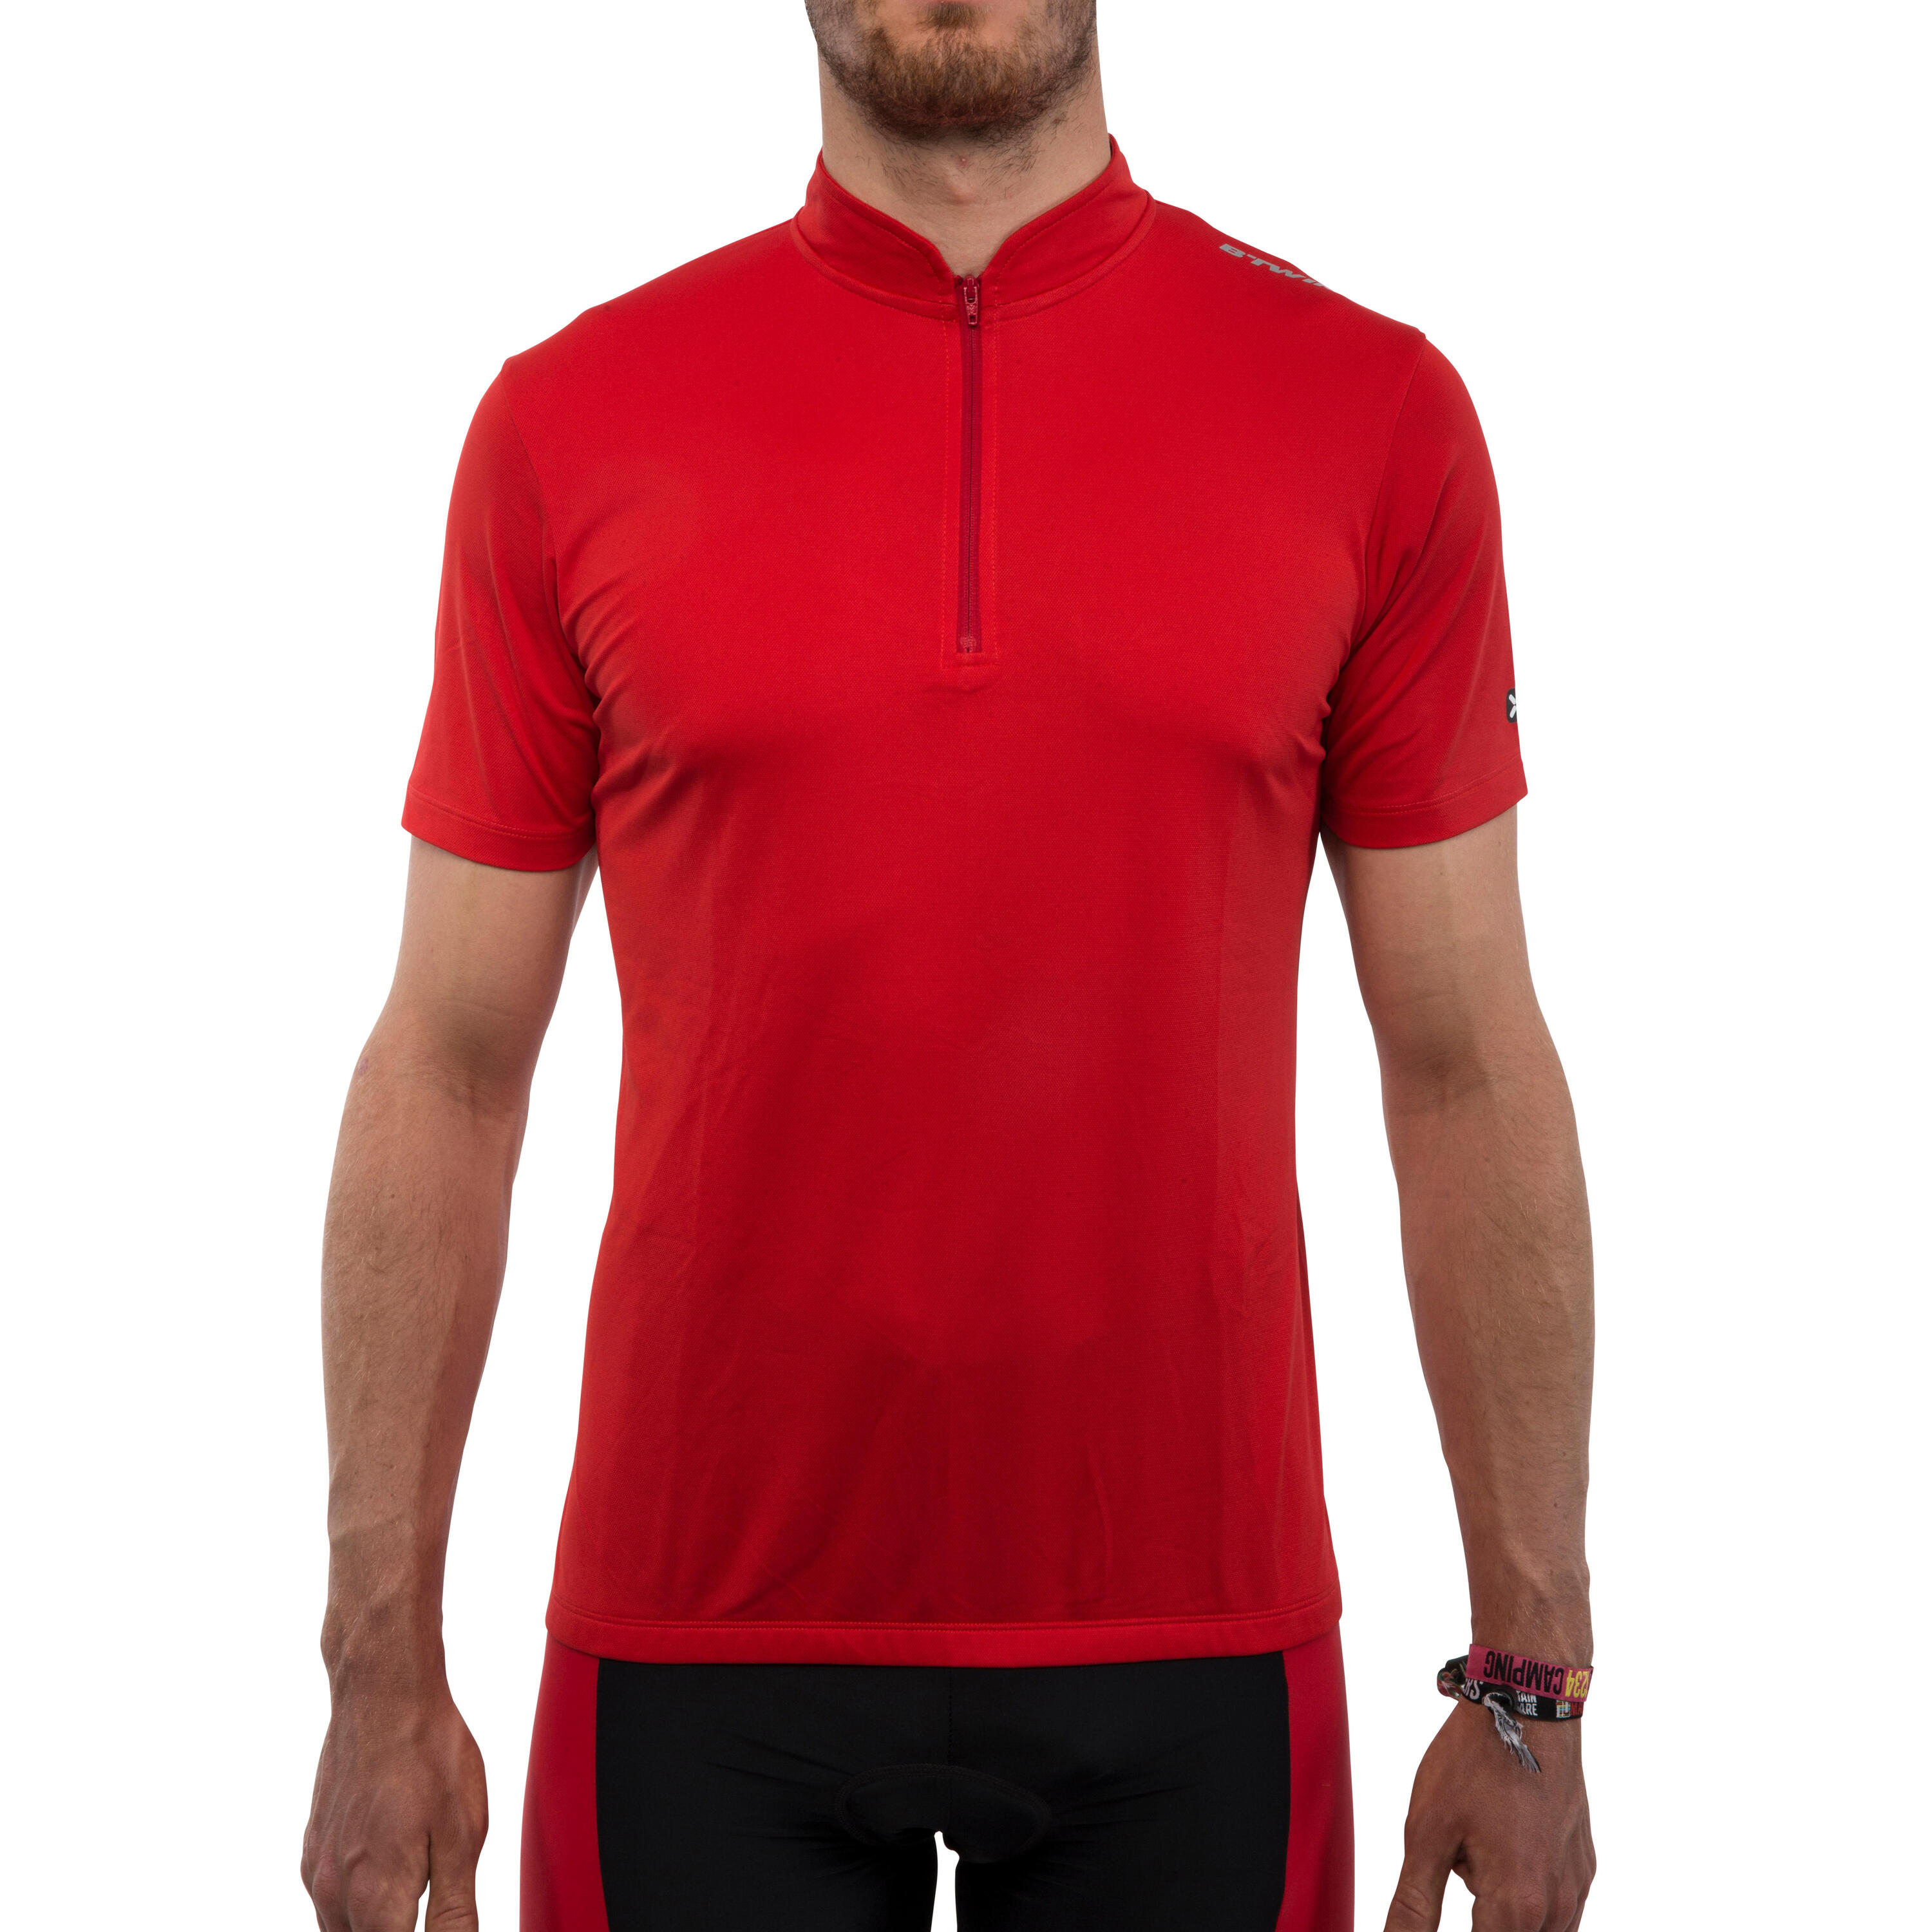 Roadcycling 100 Short-Sleeved Cycling Jersey - Red 2/11